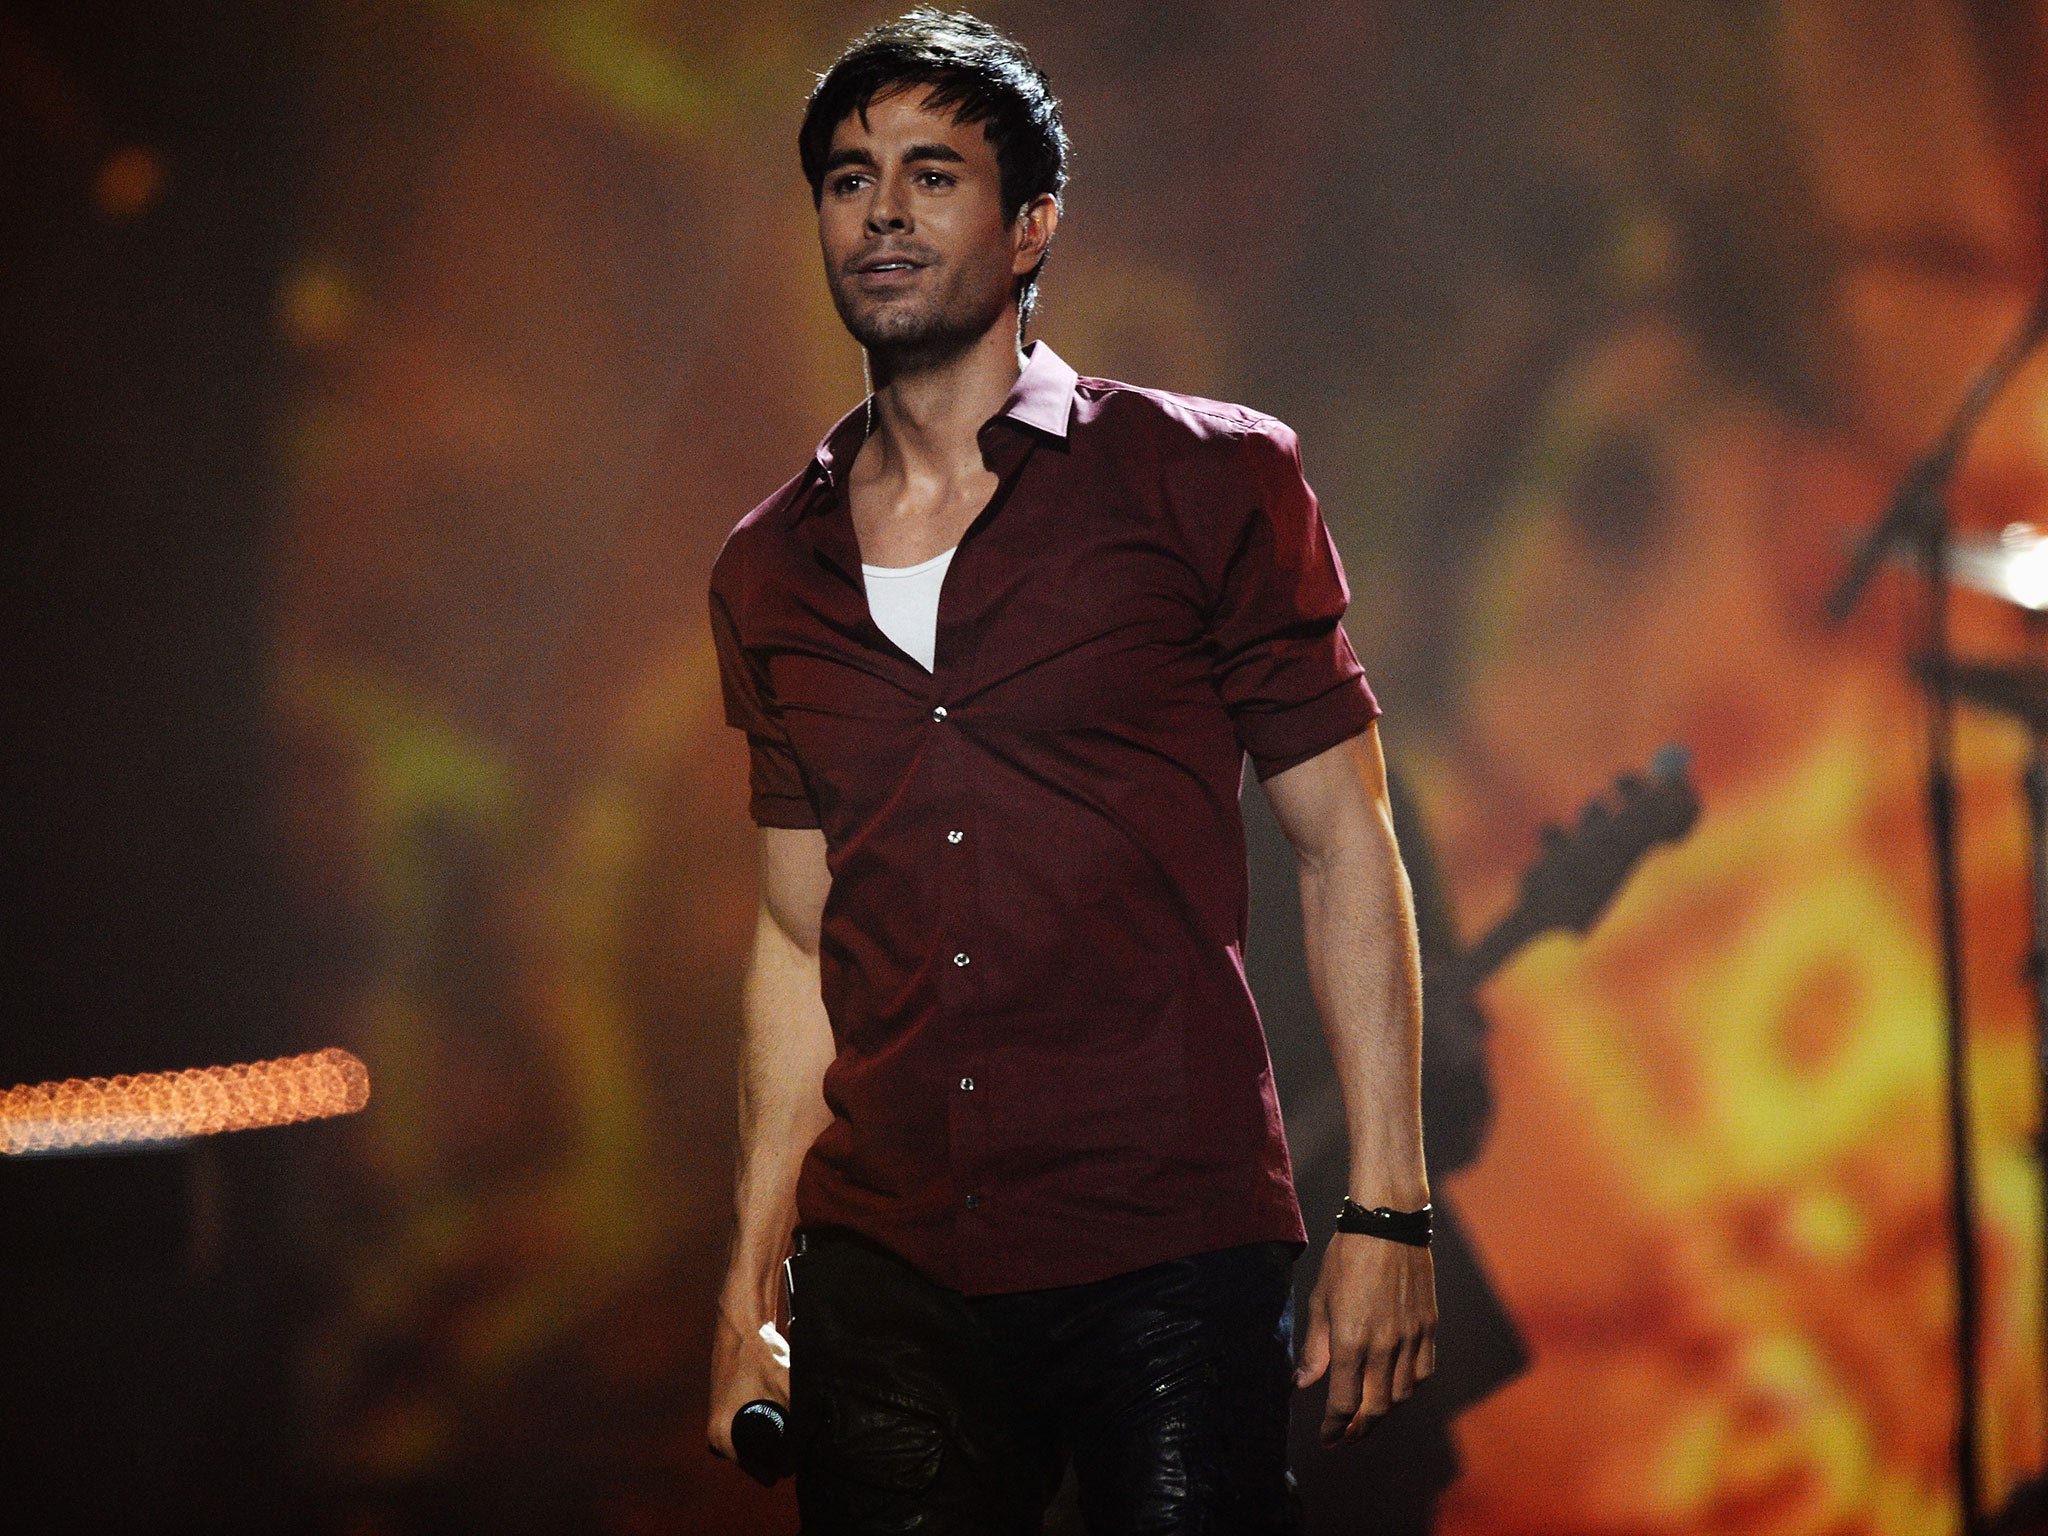 Enrique Iglesias performs on stage during the MTV EMA's 2014 at The Hydro on 9 November, 2014 in Glasgow, Scotland